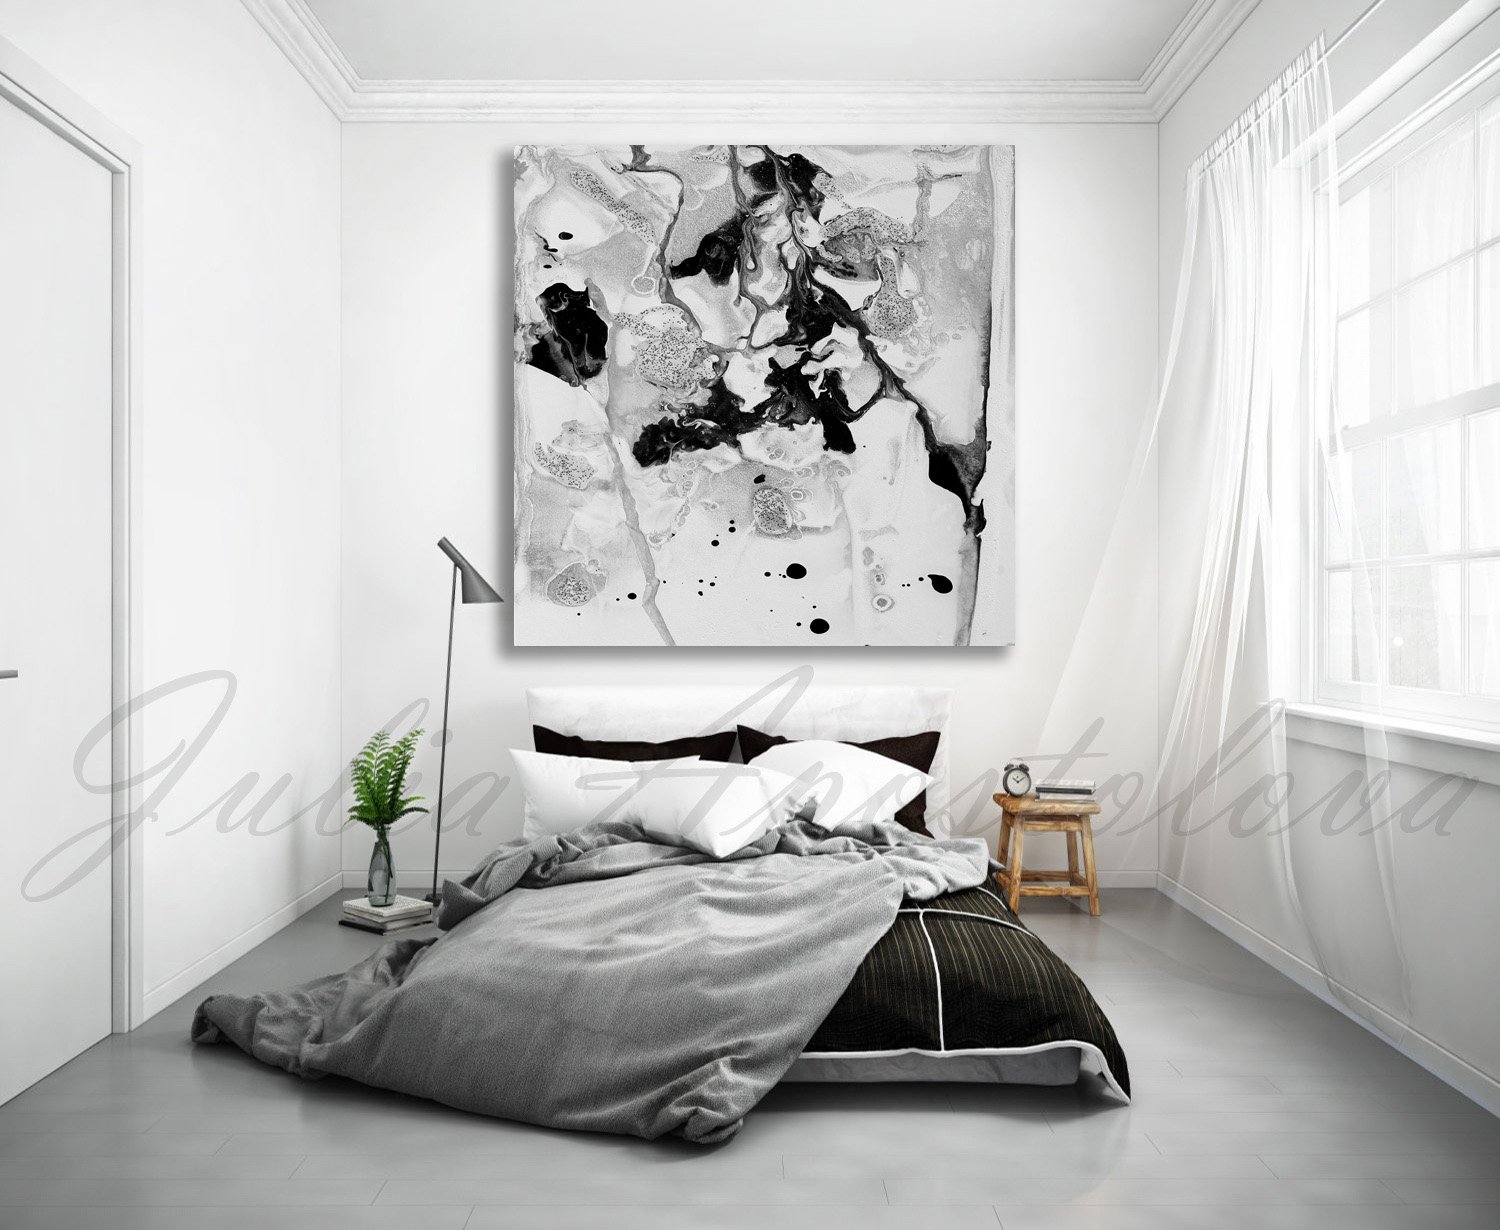 Add Abstract Black and White Art